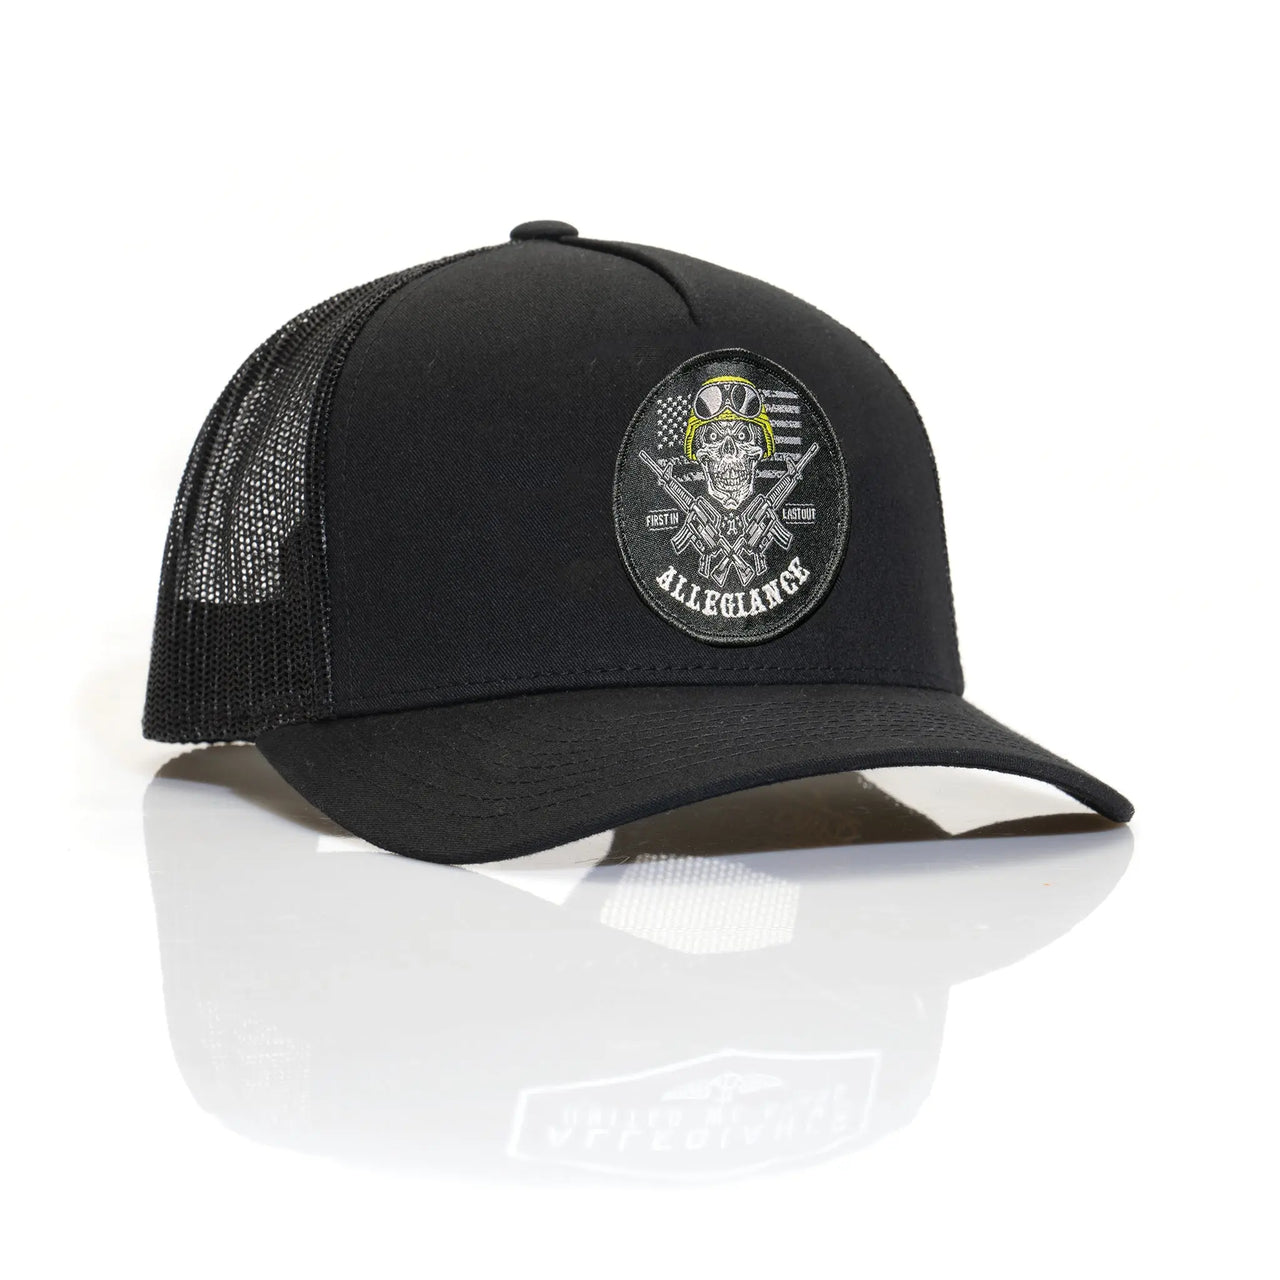 Last Out Curved Trucker - Allegiance Clothing